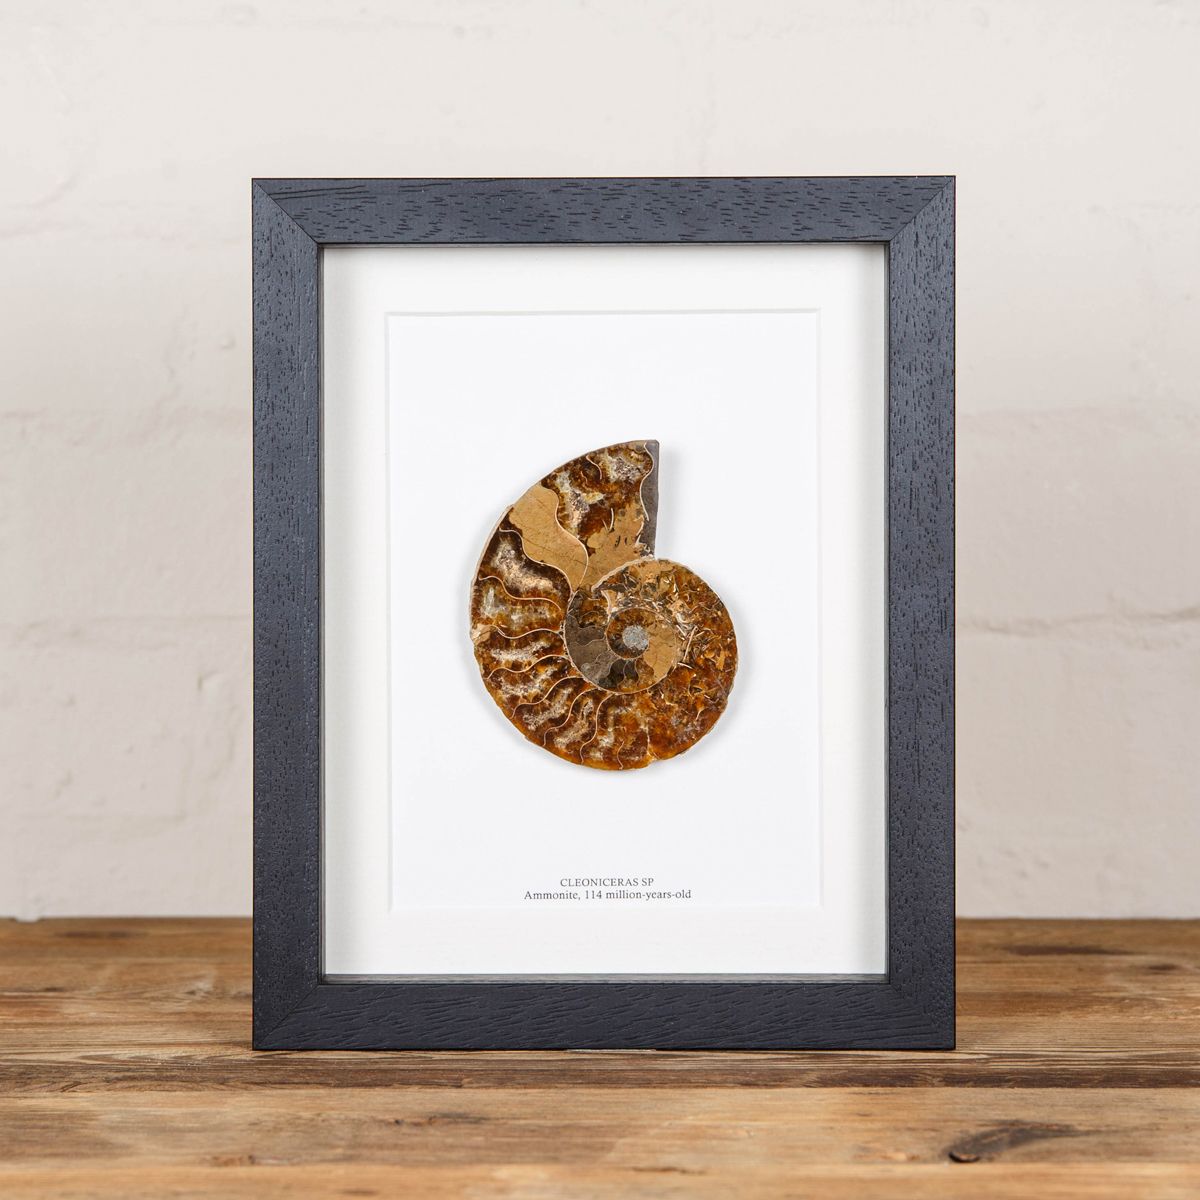 Minibeast Cut and Polished Ammonite Fossil in Box Frame (Cleoniceras sp)9x7